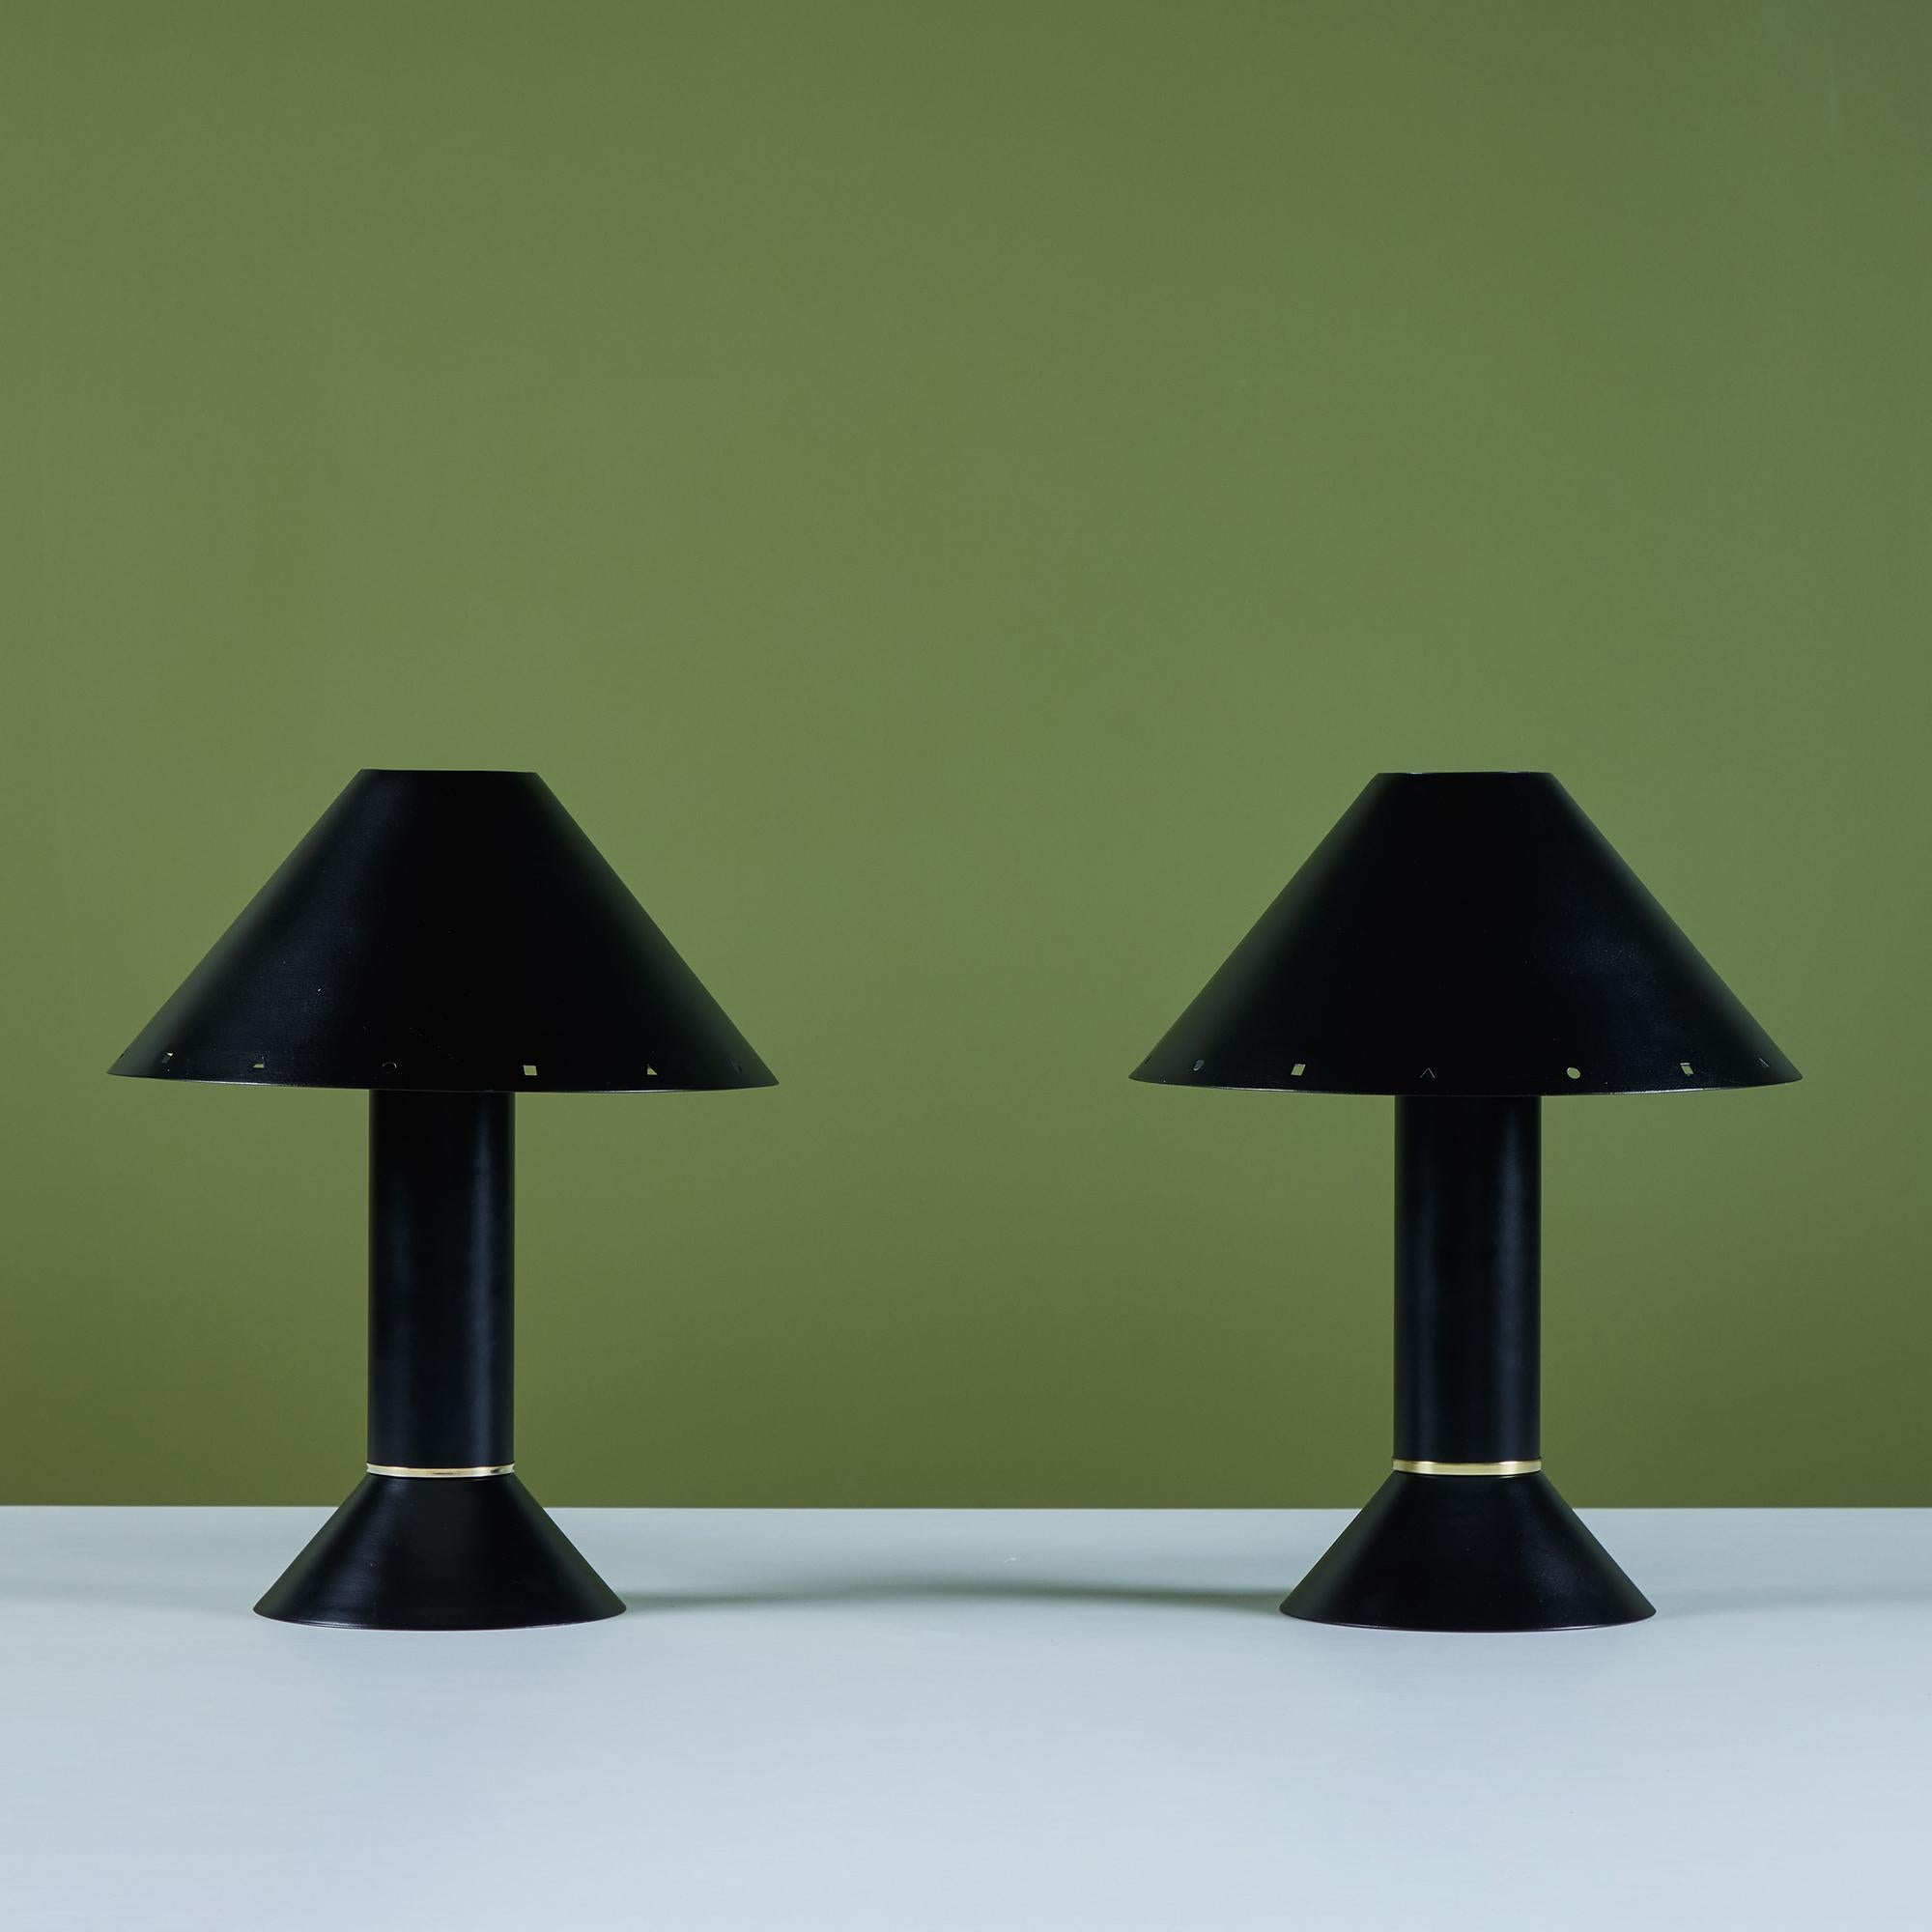 Postmodern table lamps by Los Angeles lighting designer Ron Rezek, c.1980s. The lamps feature a black enameled metal frame and removable black shade with polished brass ring accent that sits at the bottom of cone shaped bases. The shades feature